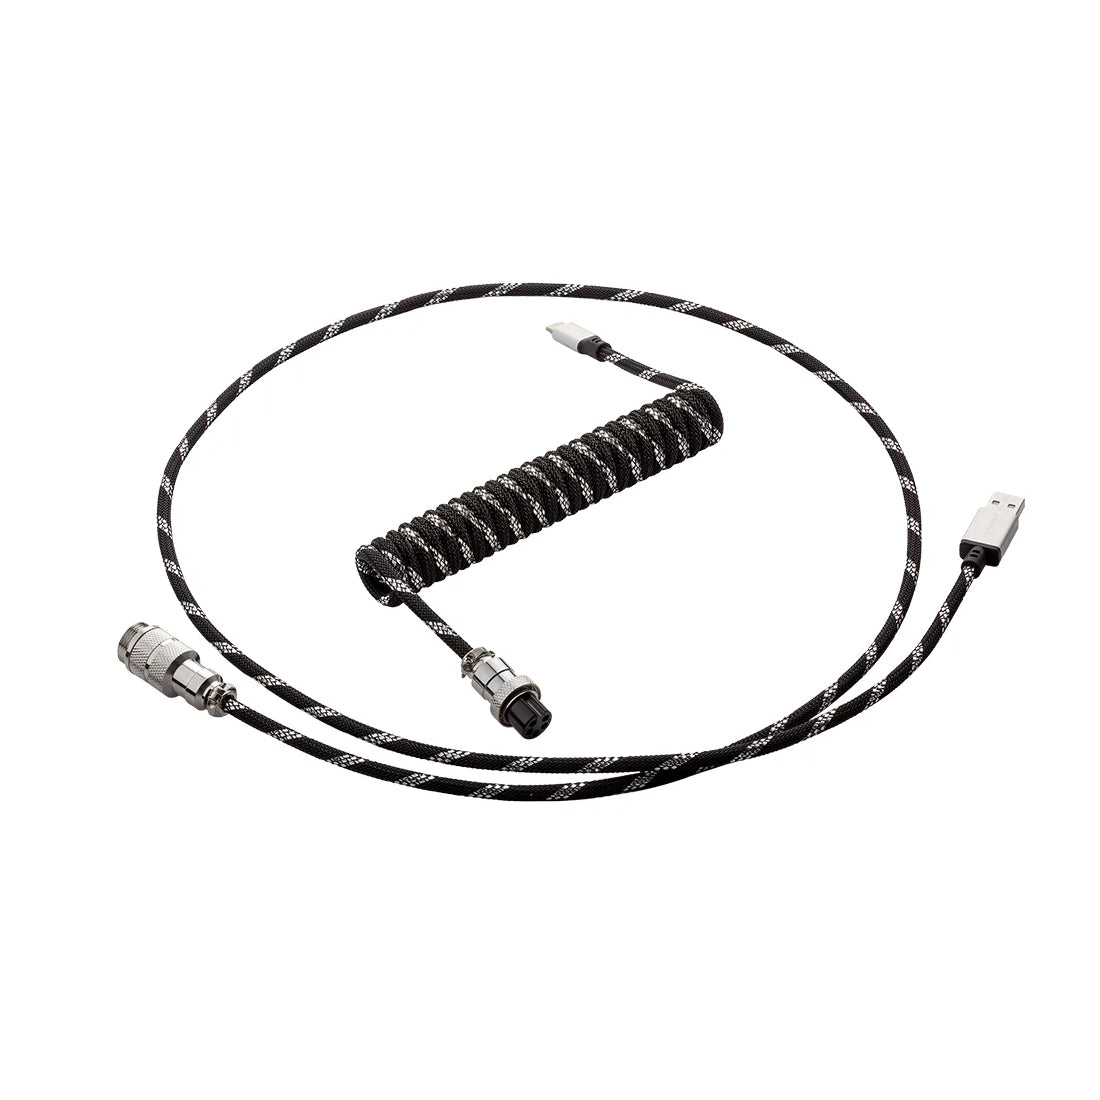 CableMod Pro Coiled Keyboard Cable (Sterling Black, USB A to USB Type C, 150cm) - كابل - Store 974 | ستور ٩٧٤